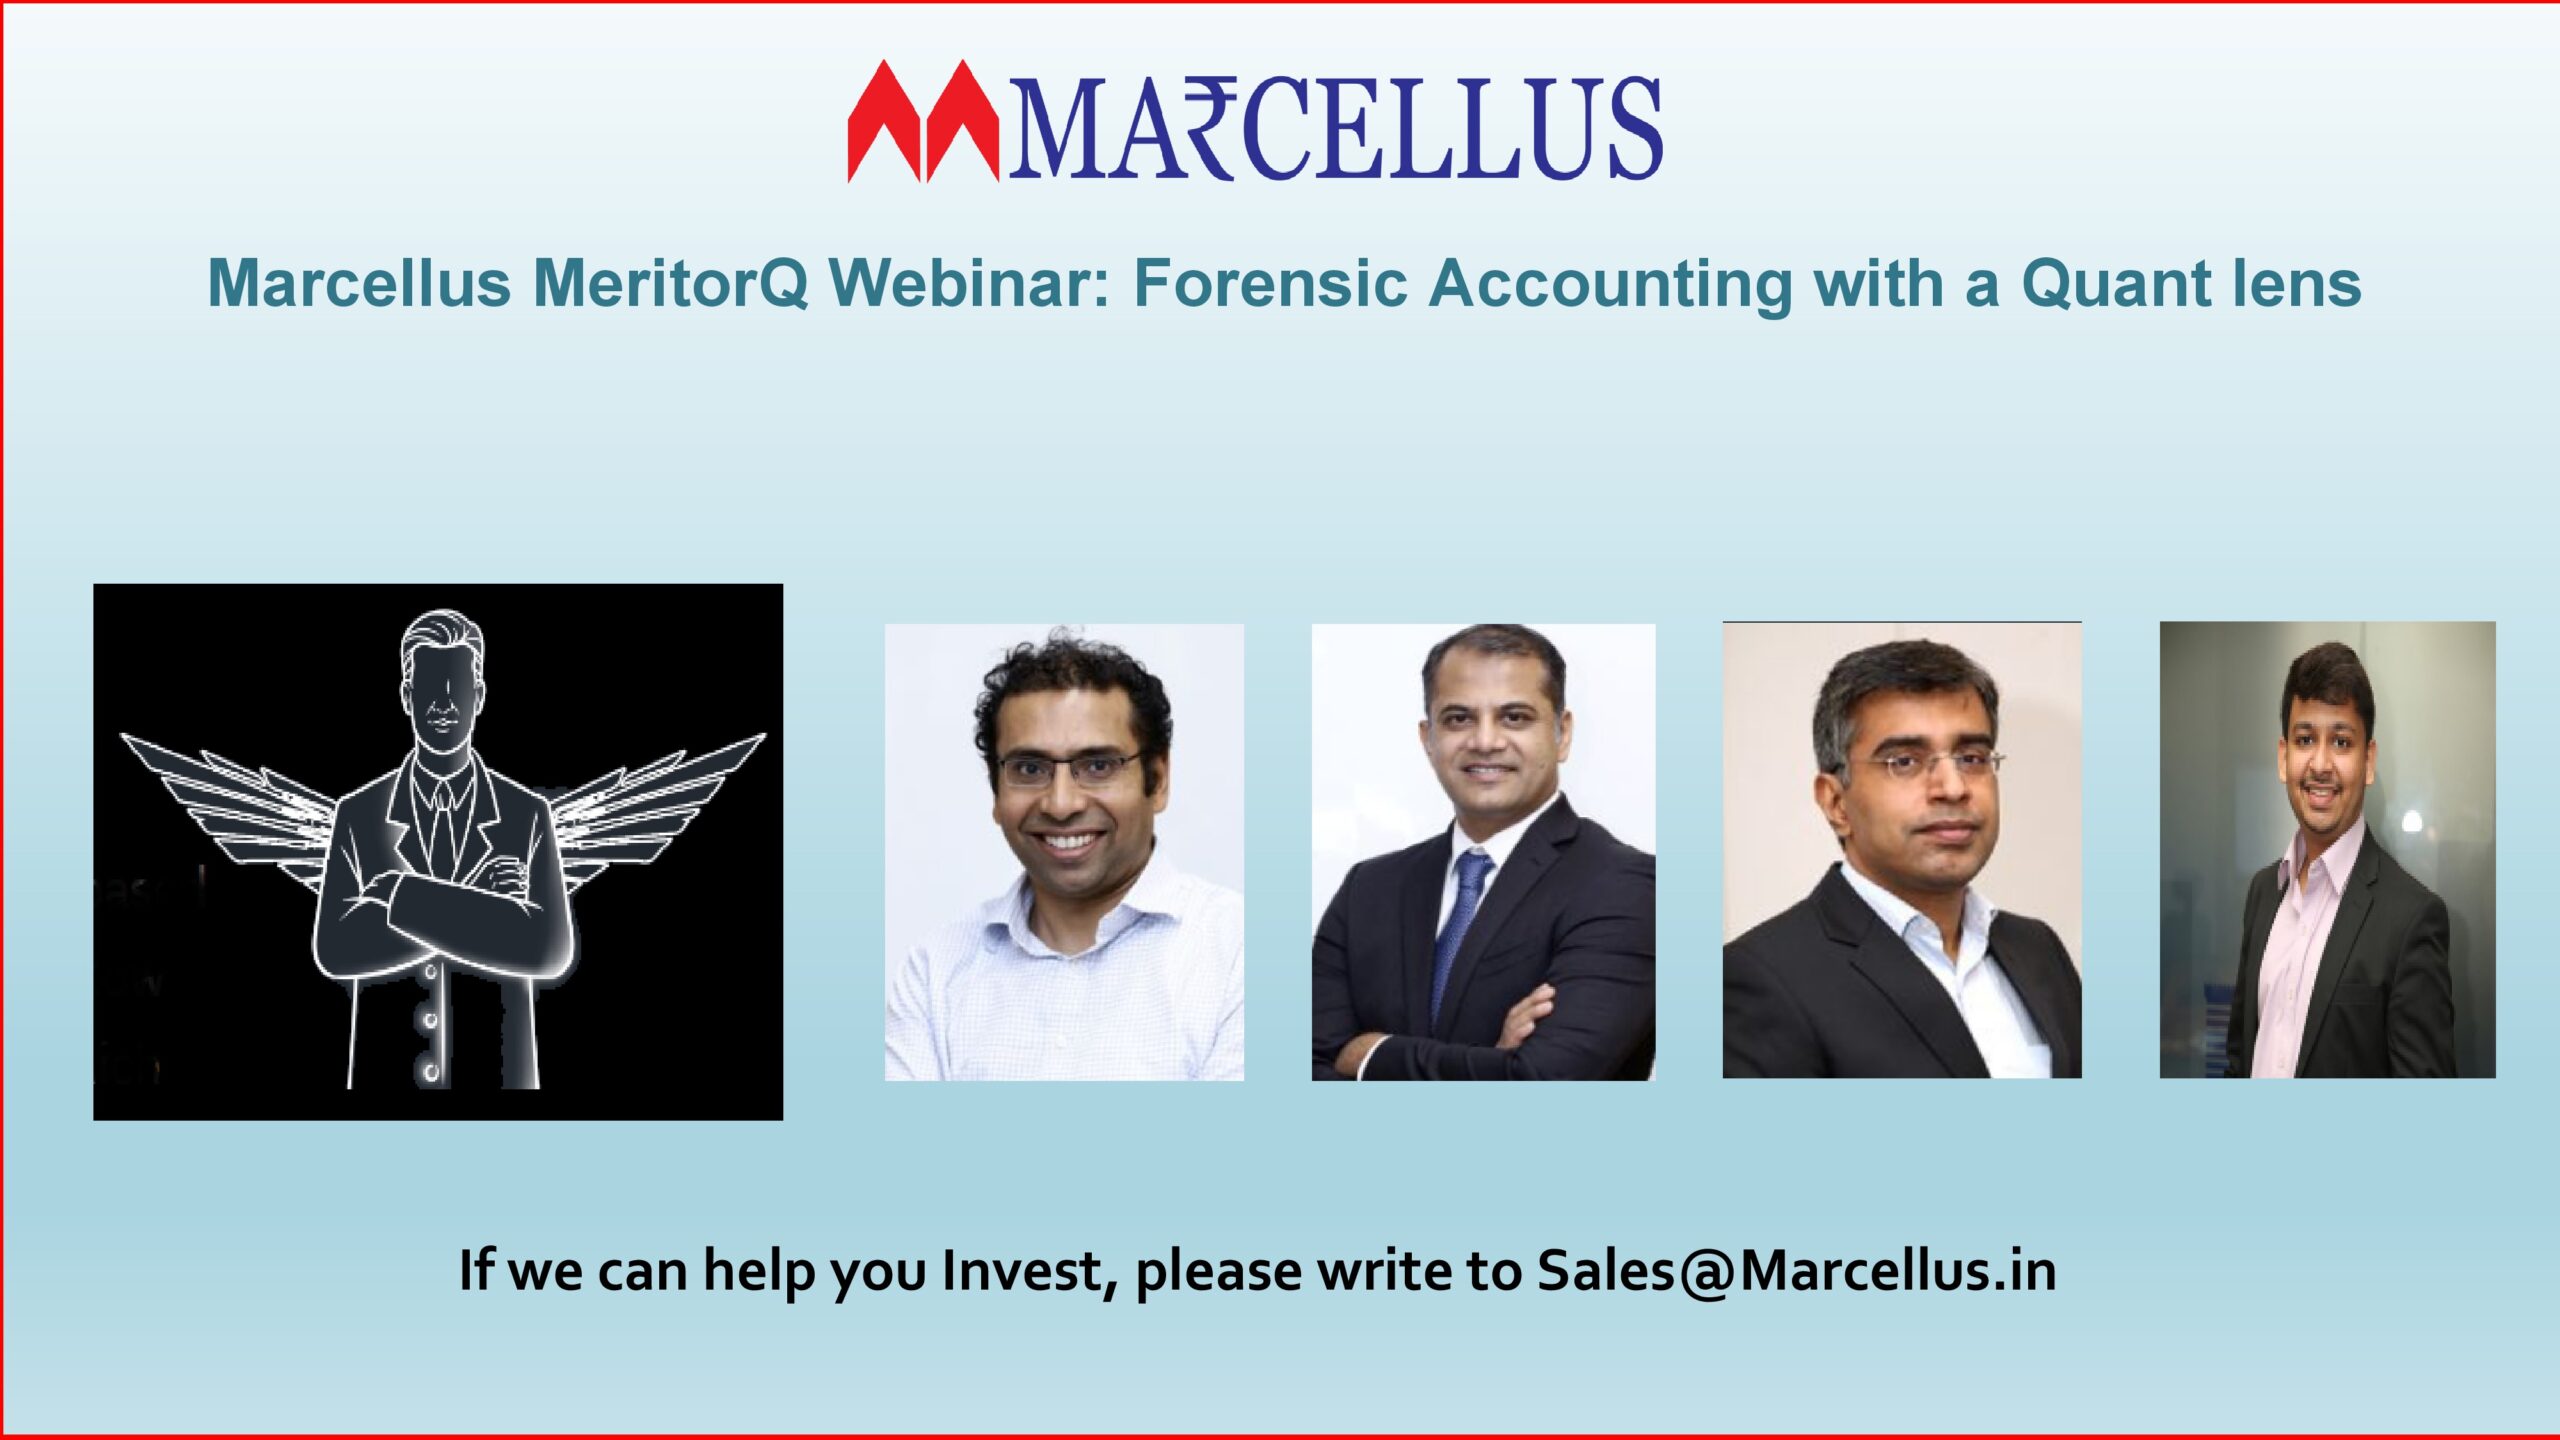 Marcellus MeritorQ Portfolio Webinar on Forensic Accounting with a Quant lens